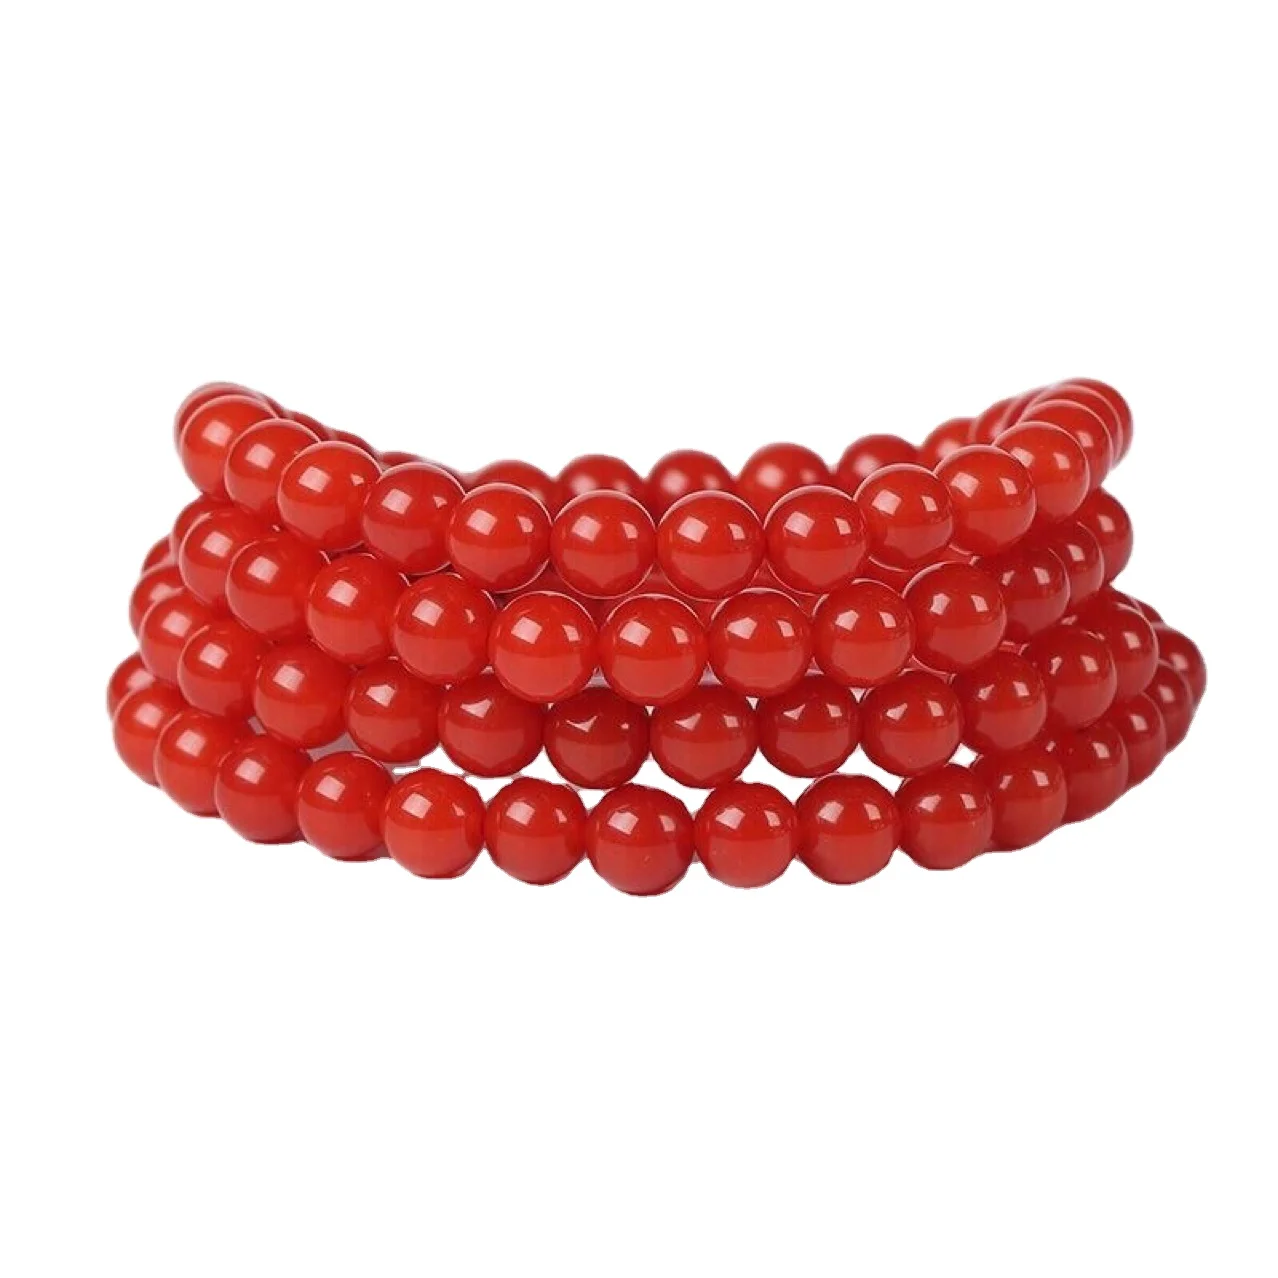 

Wholesale High Quality Gemstone Strand Red Coral Stone Loose Beads for Jewelry Making, Multi colors